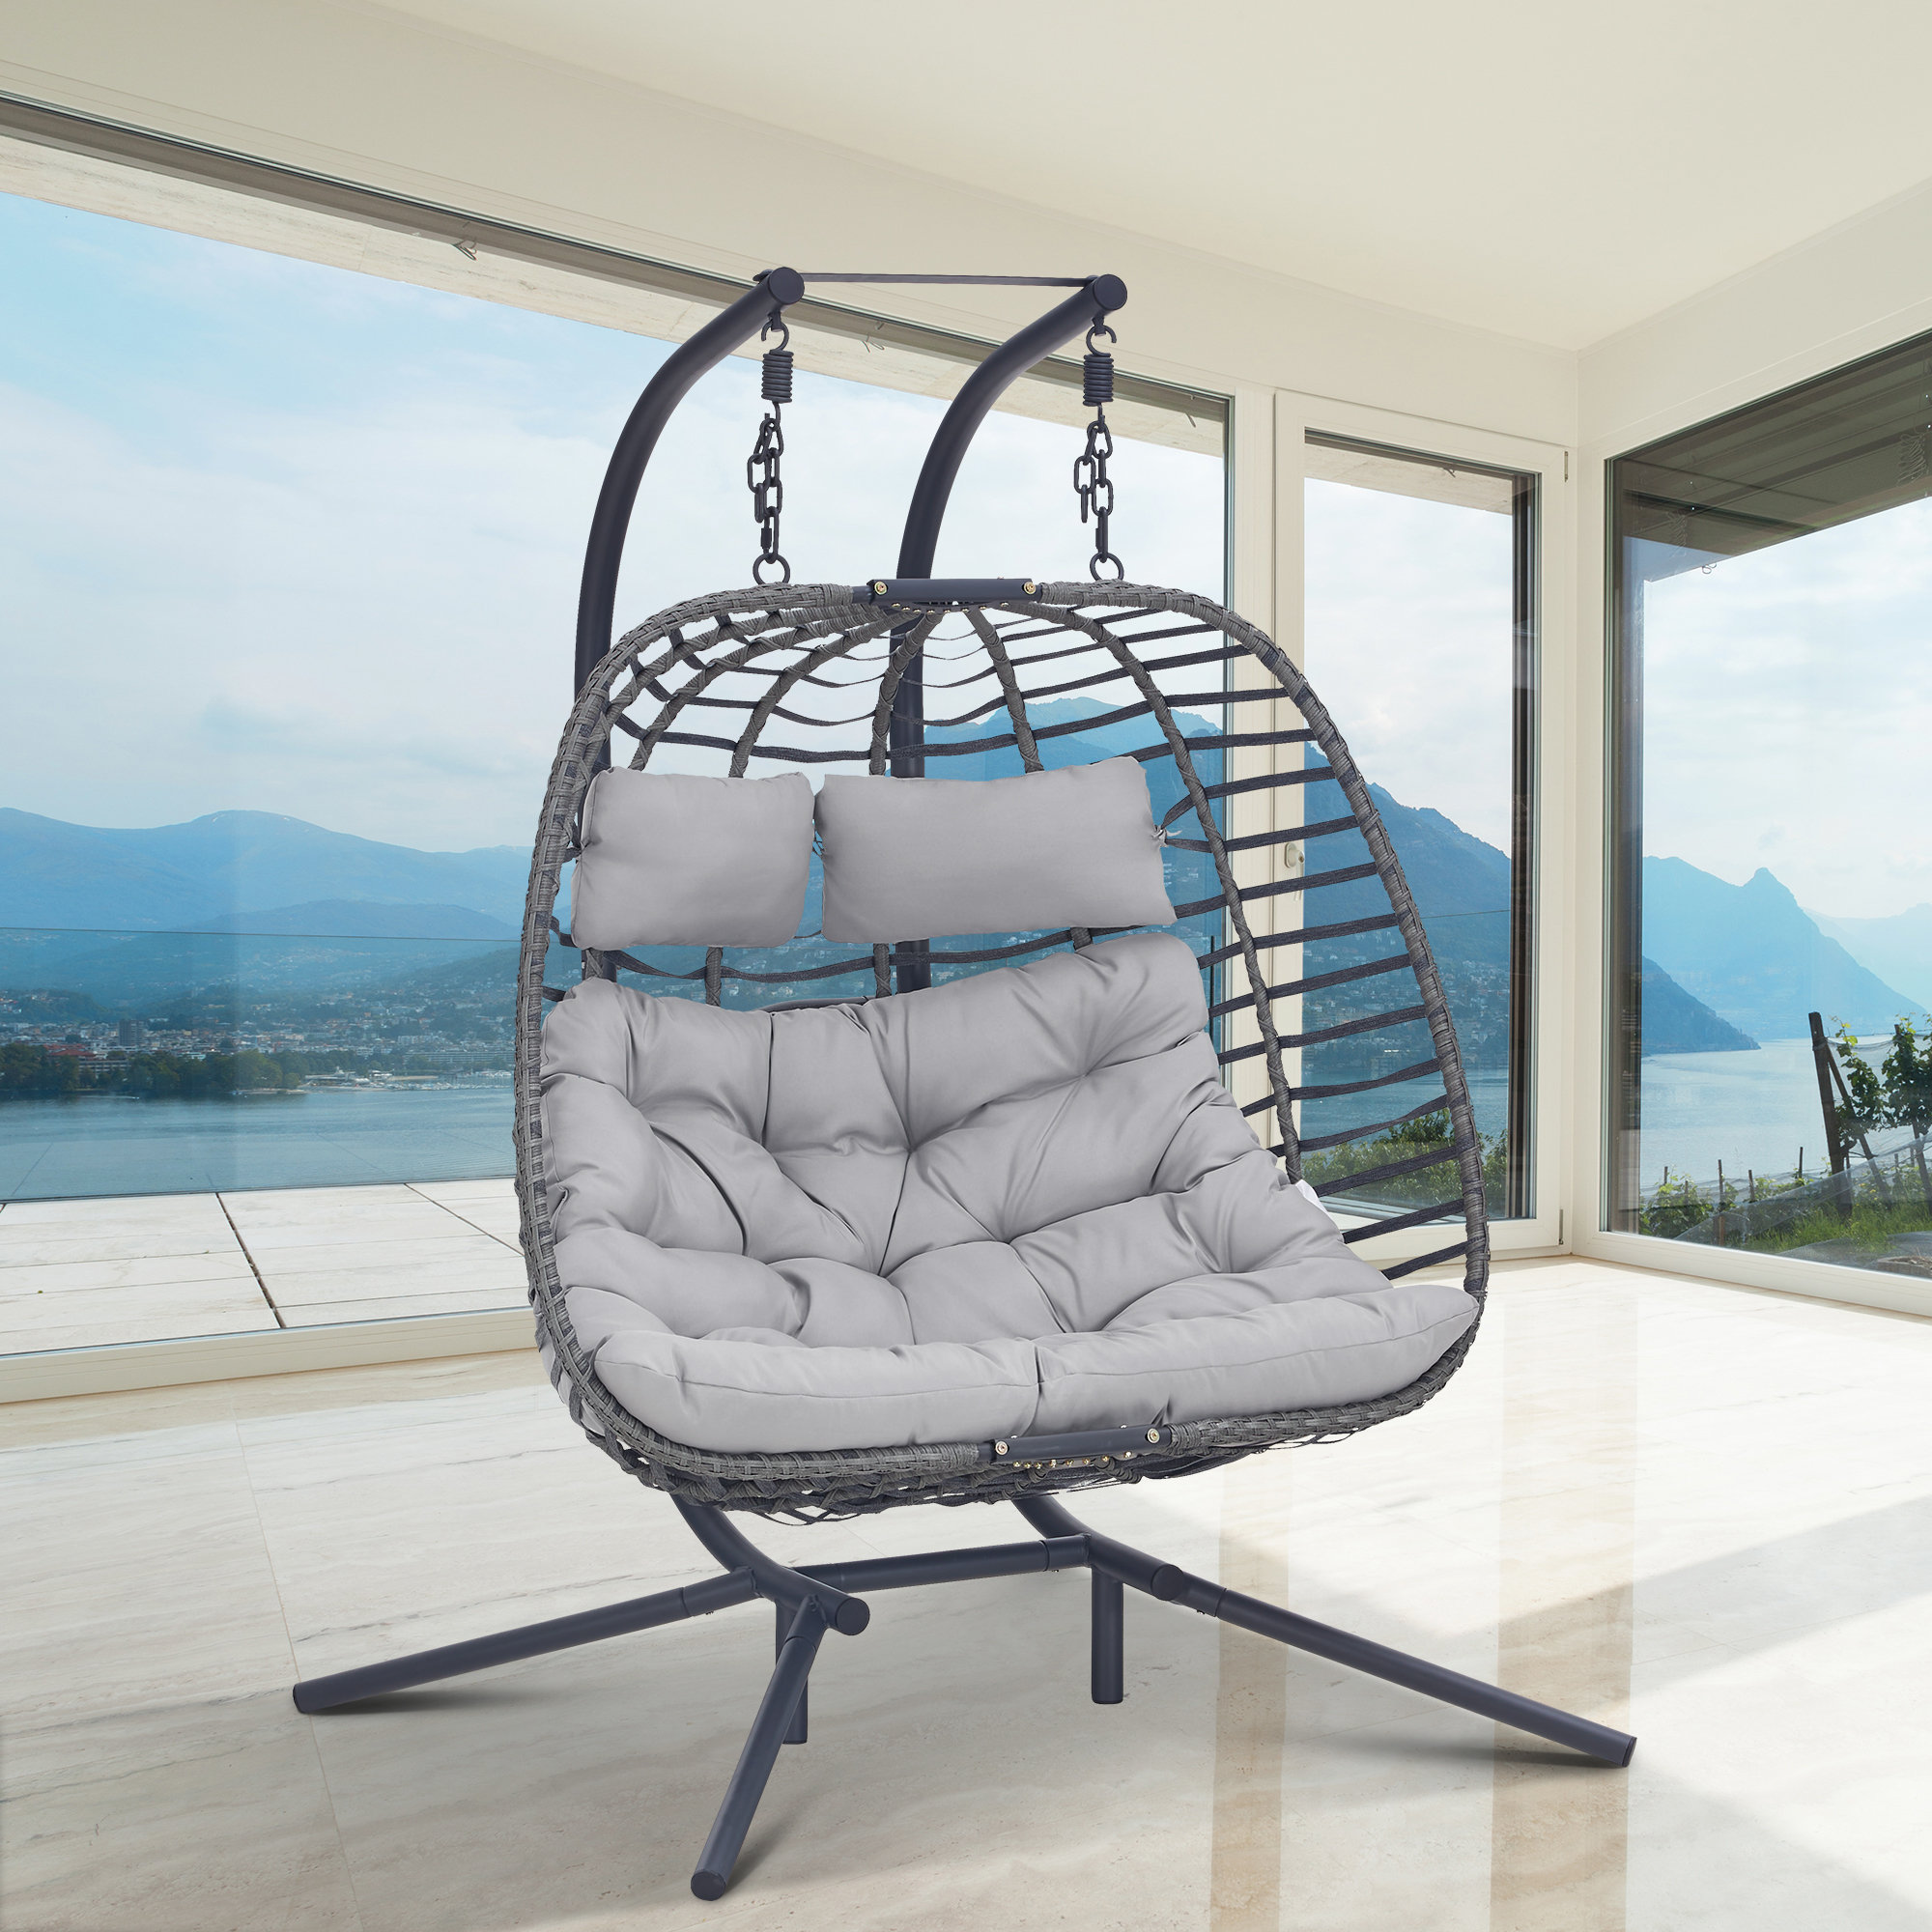 Burhans 2 Person Swing Chair with Stand